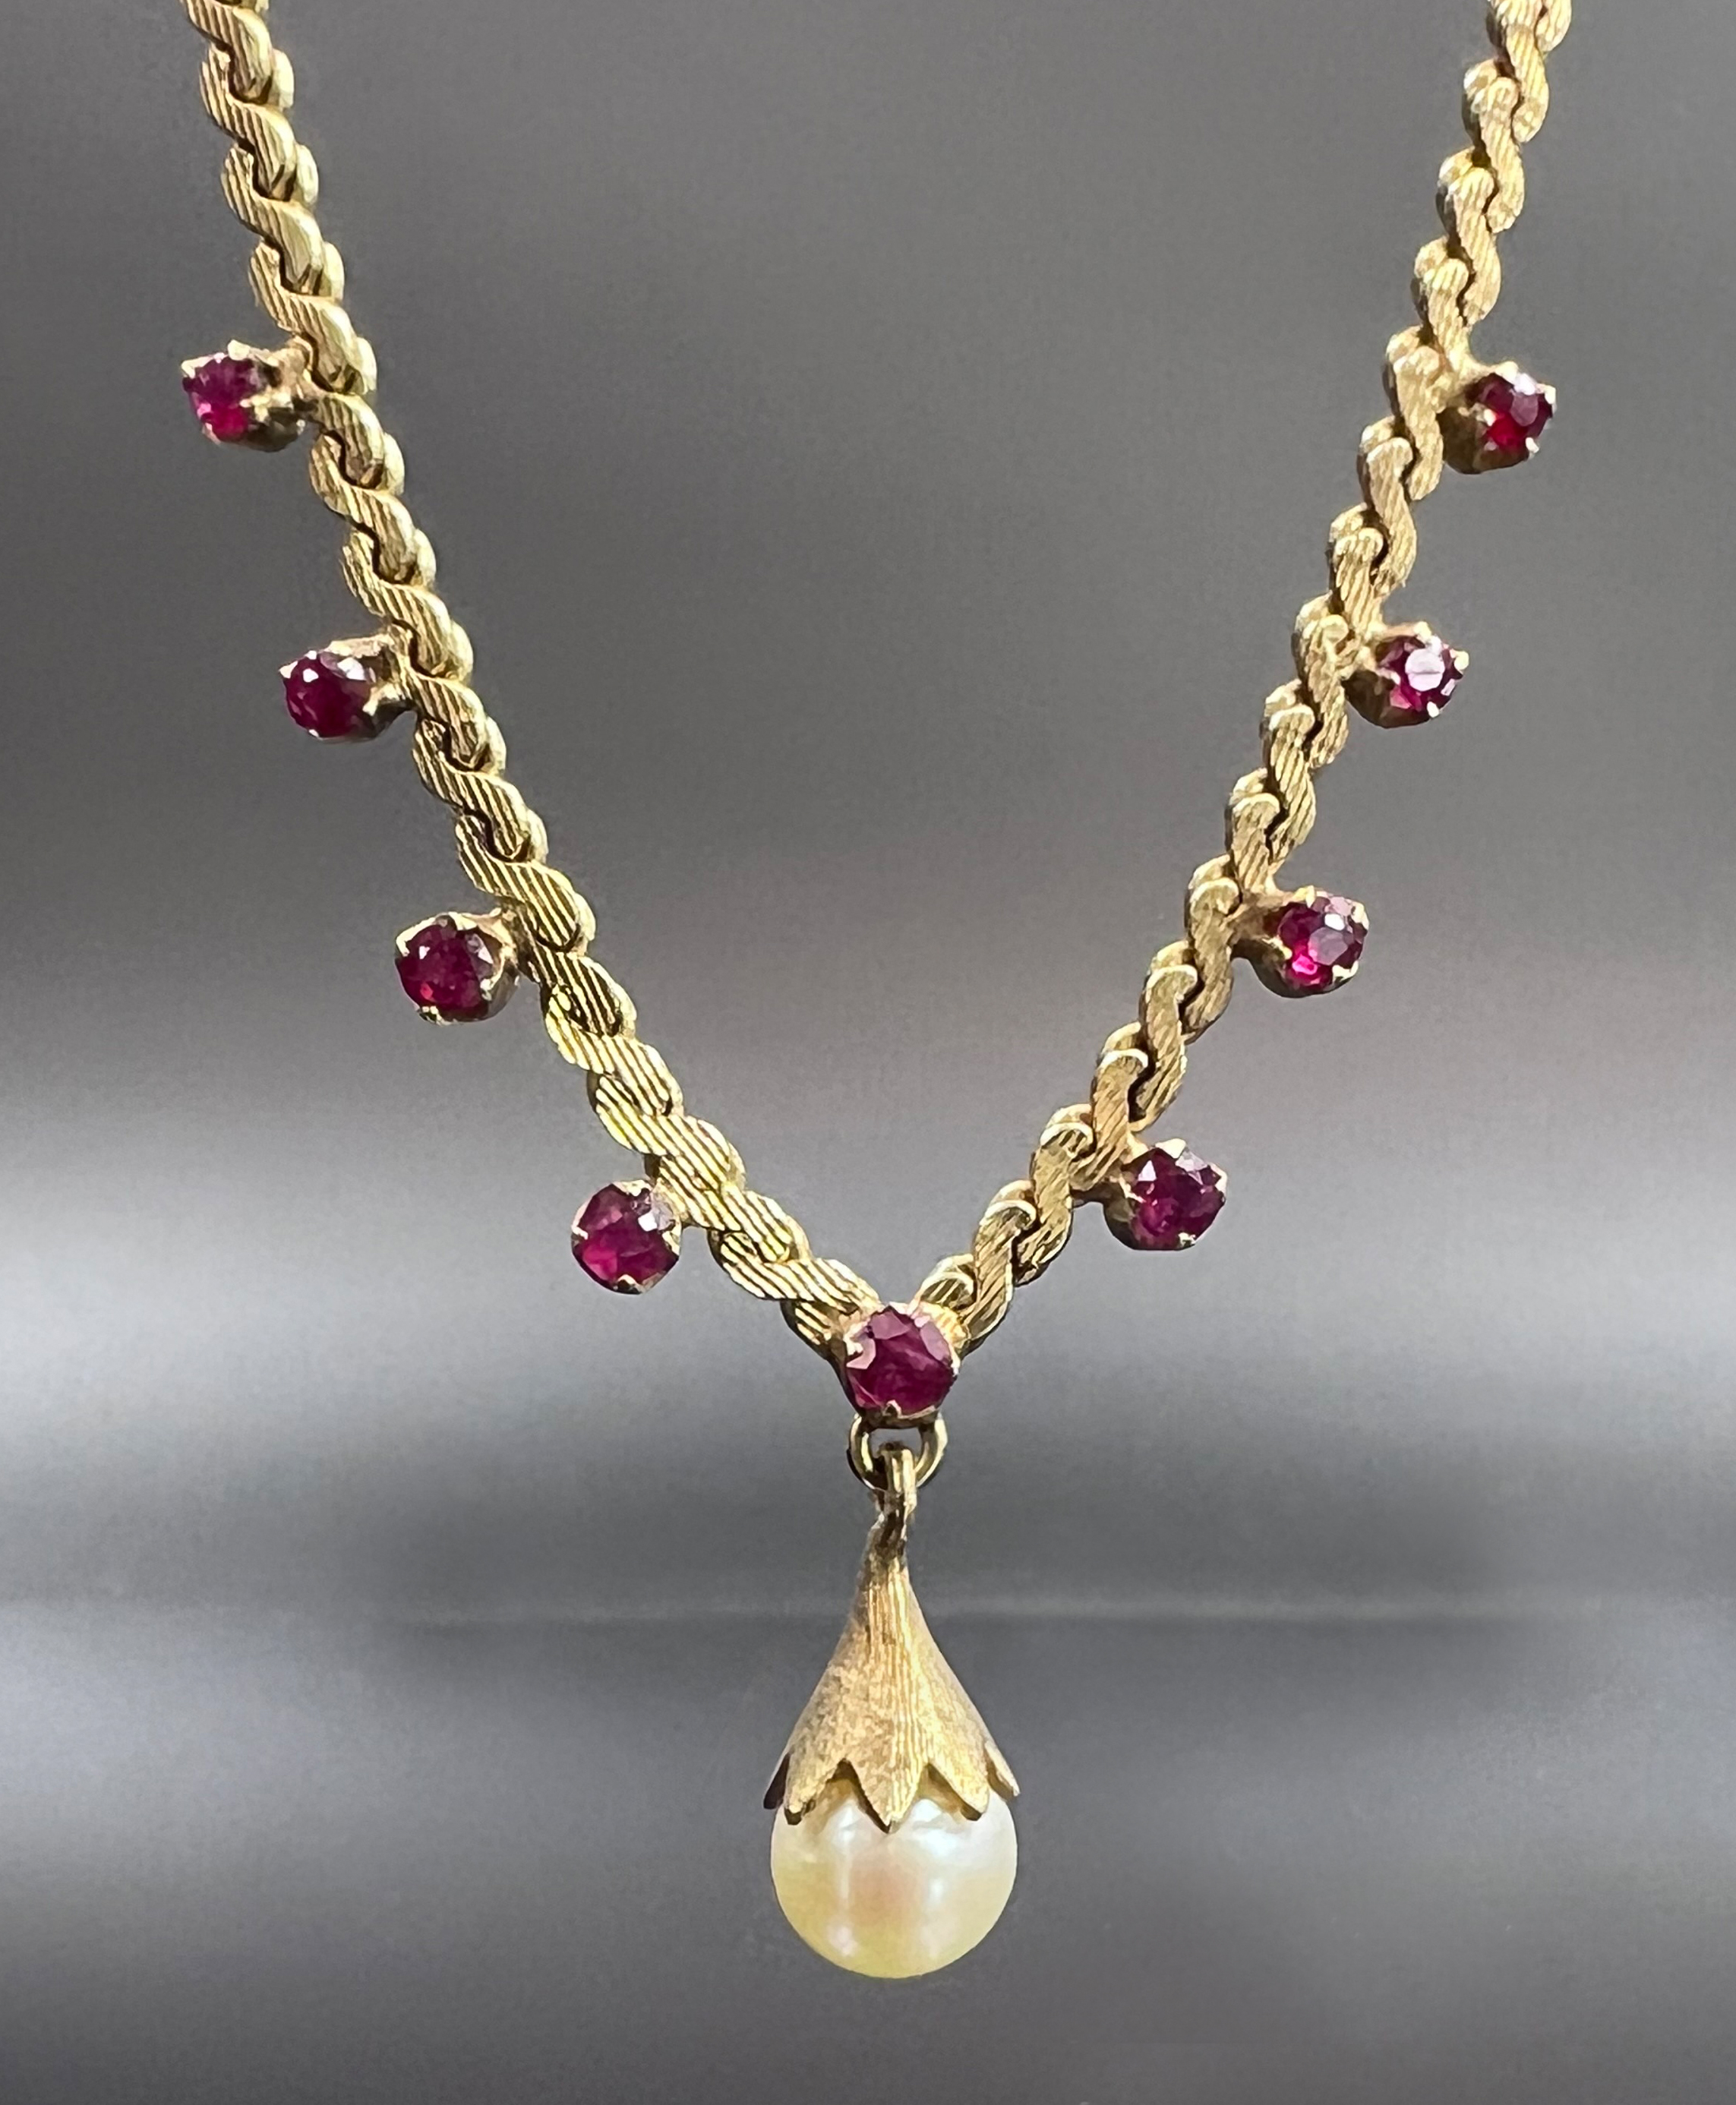 Necklace. 585 yellow gold with 9 small rubies and a pearl.